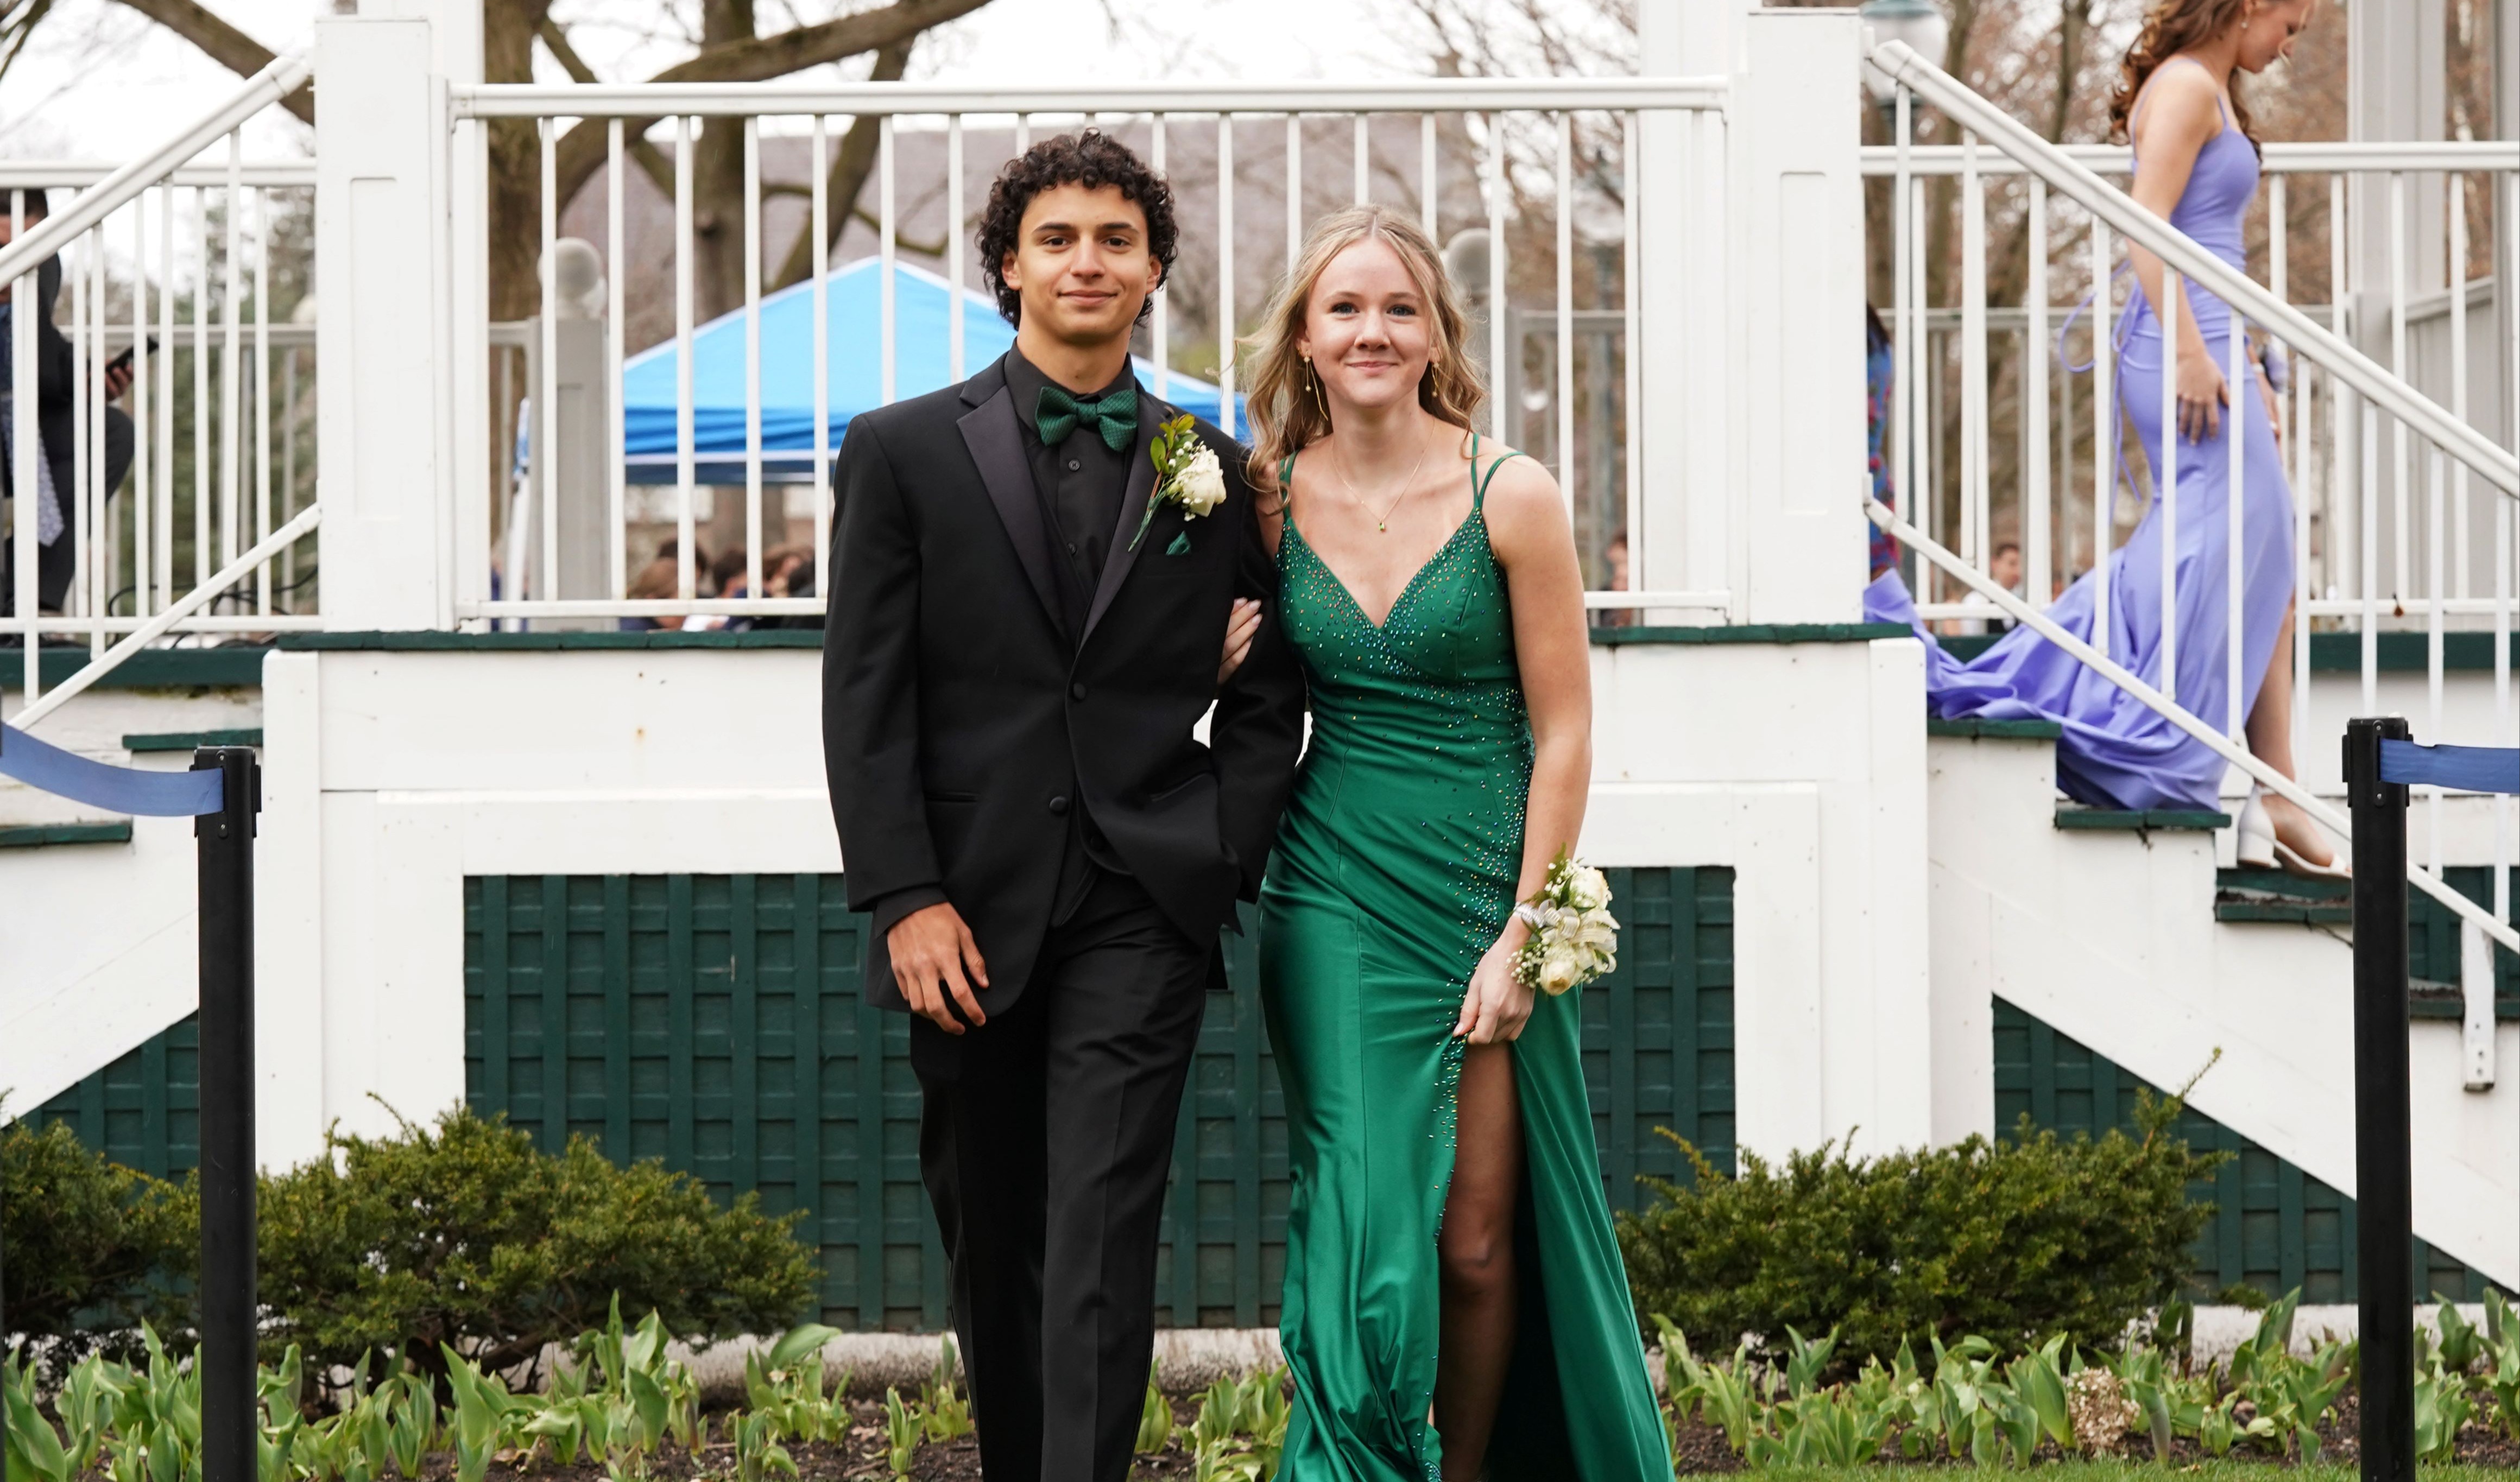 Two teens walk together at prom.